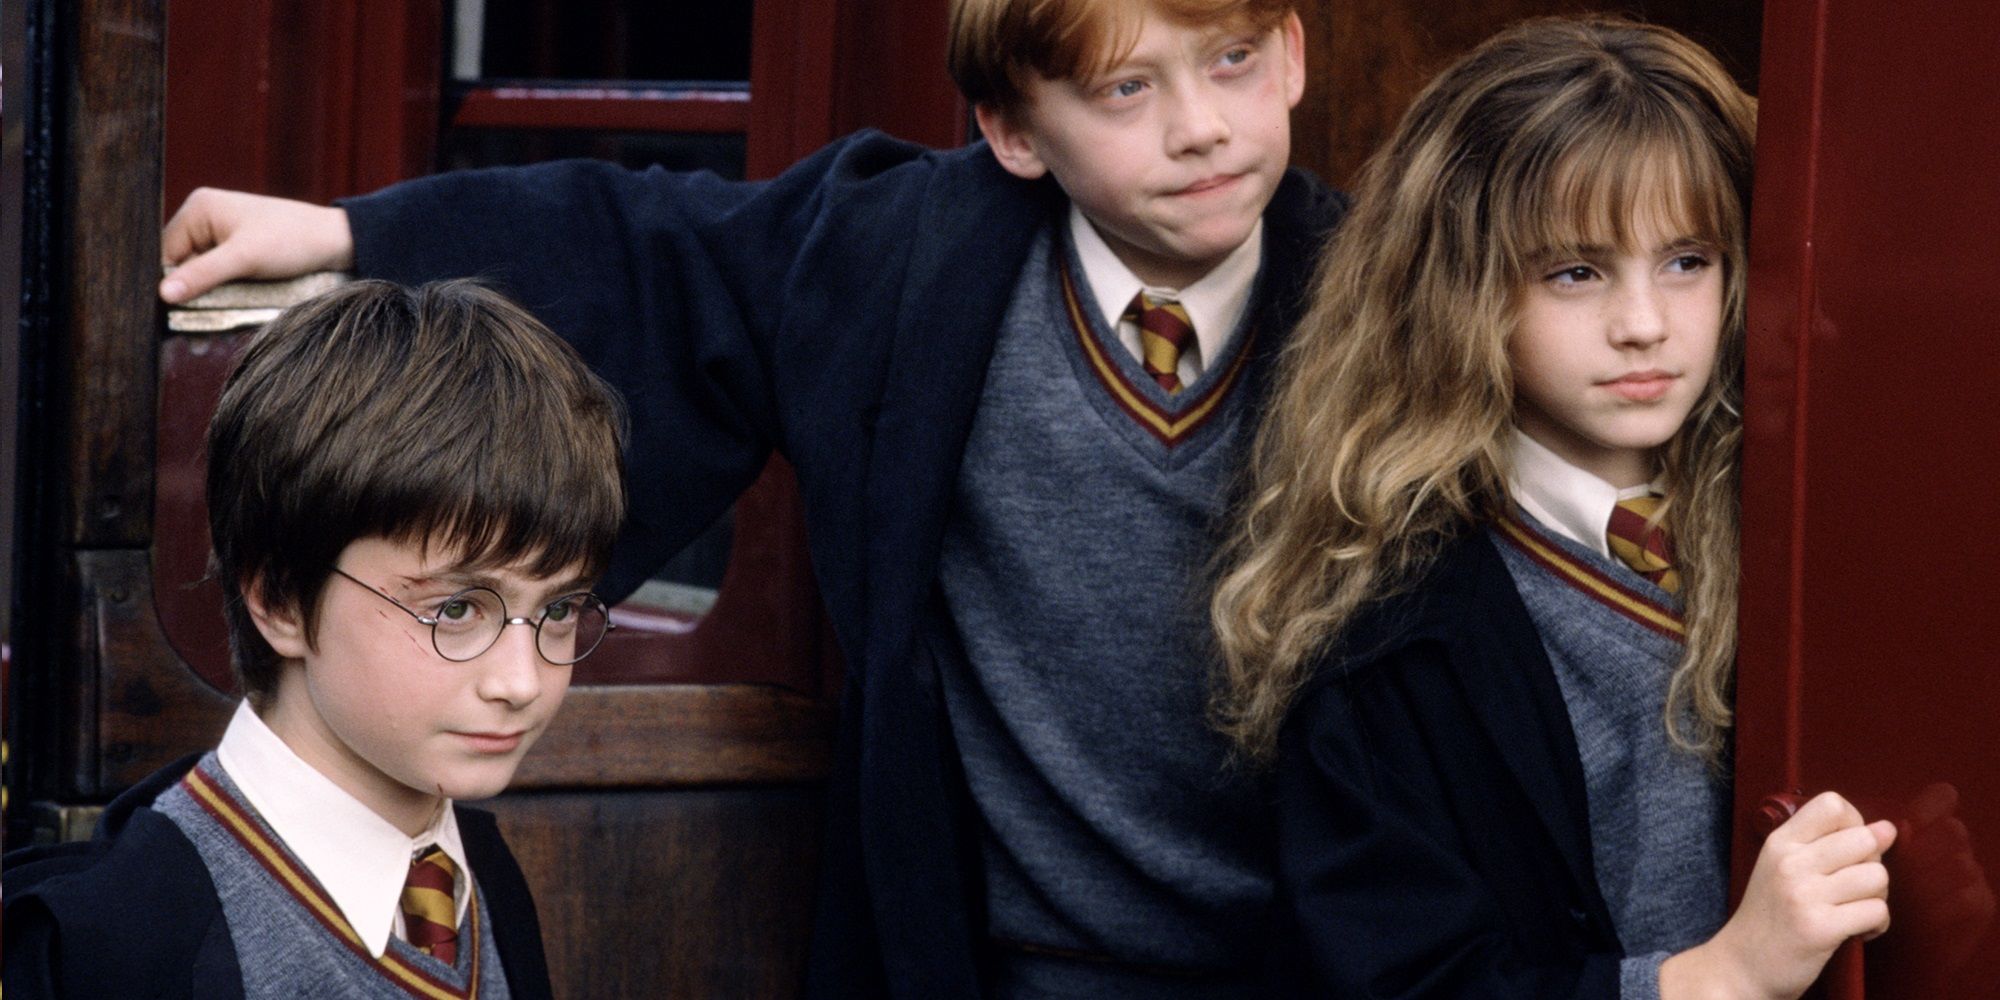 Harry, Ron and Hermione boarding the Hogwarts Express